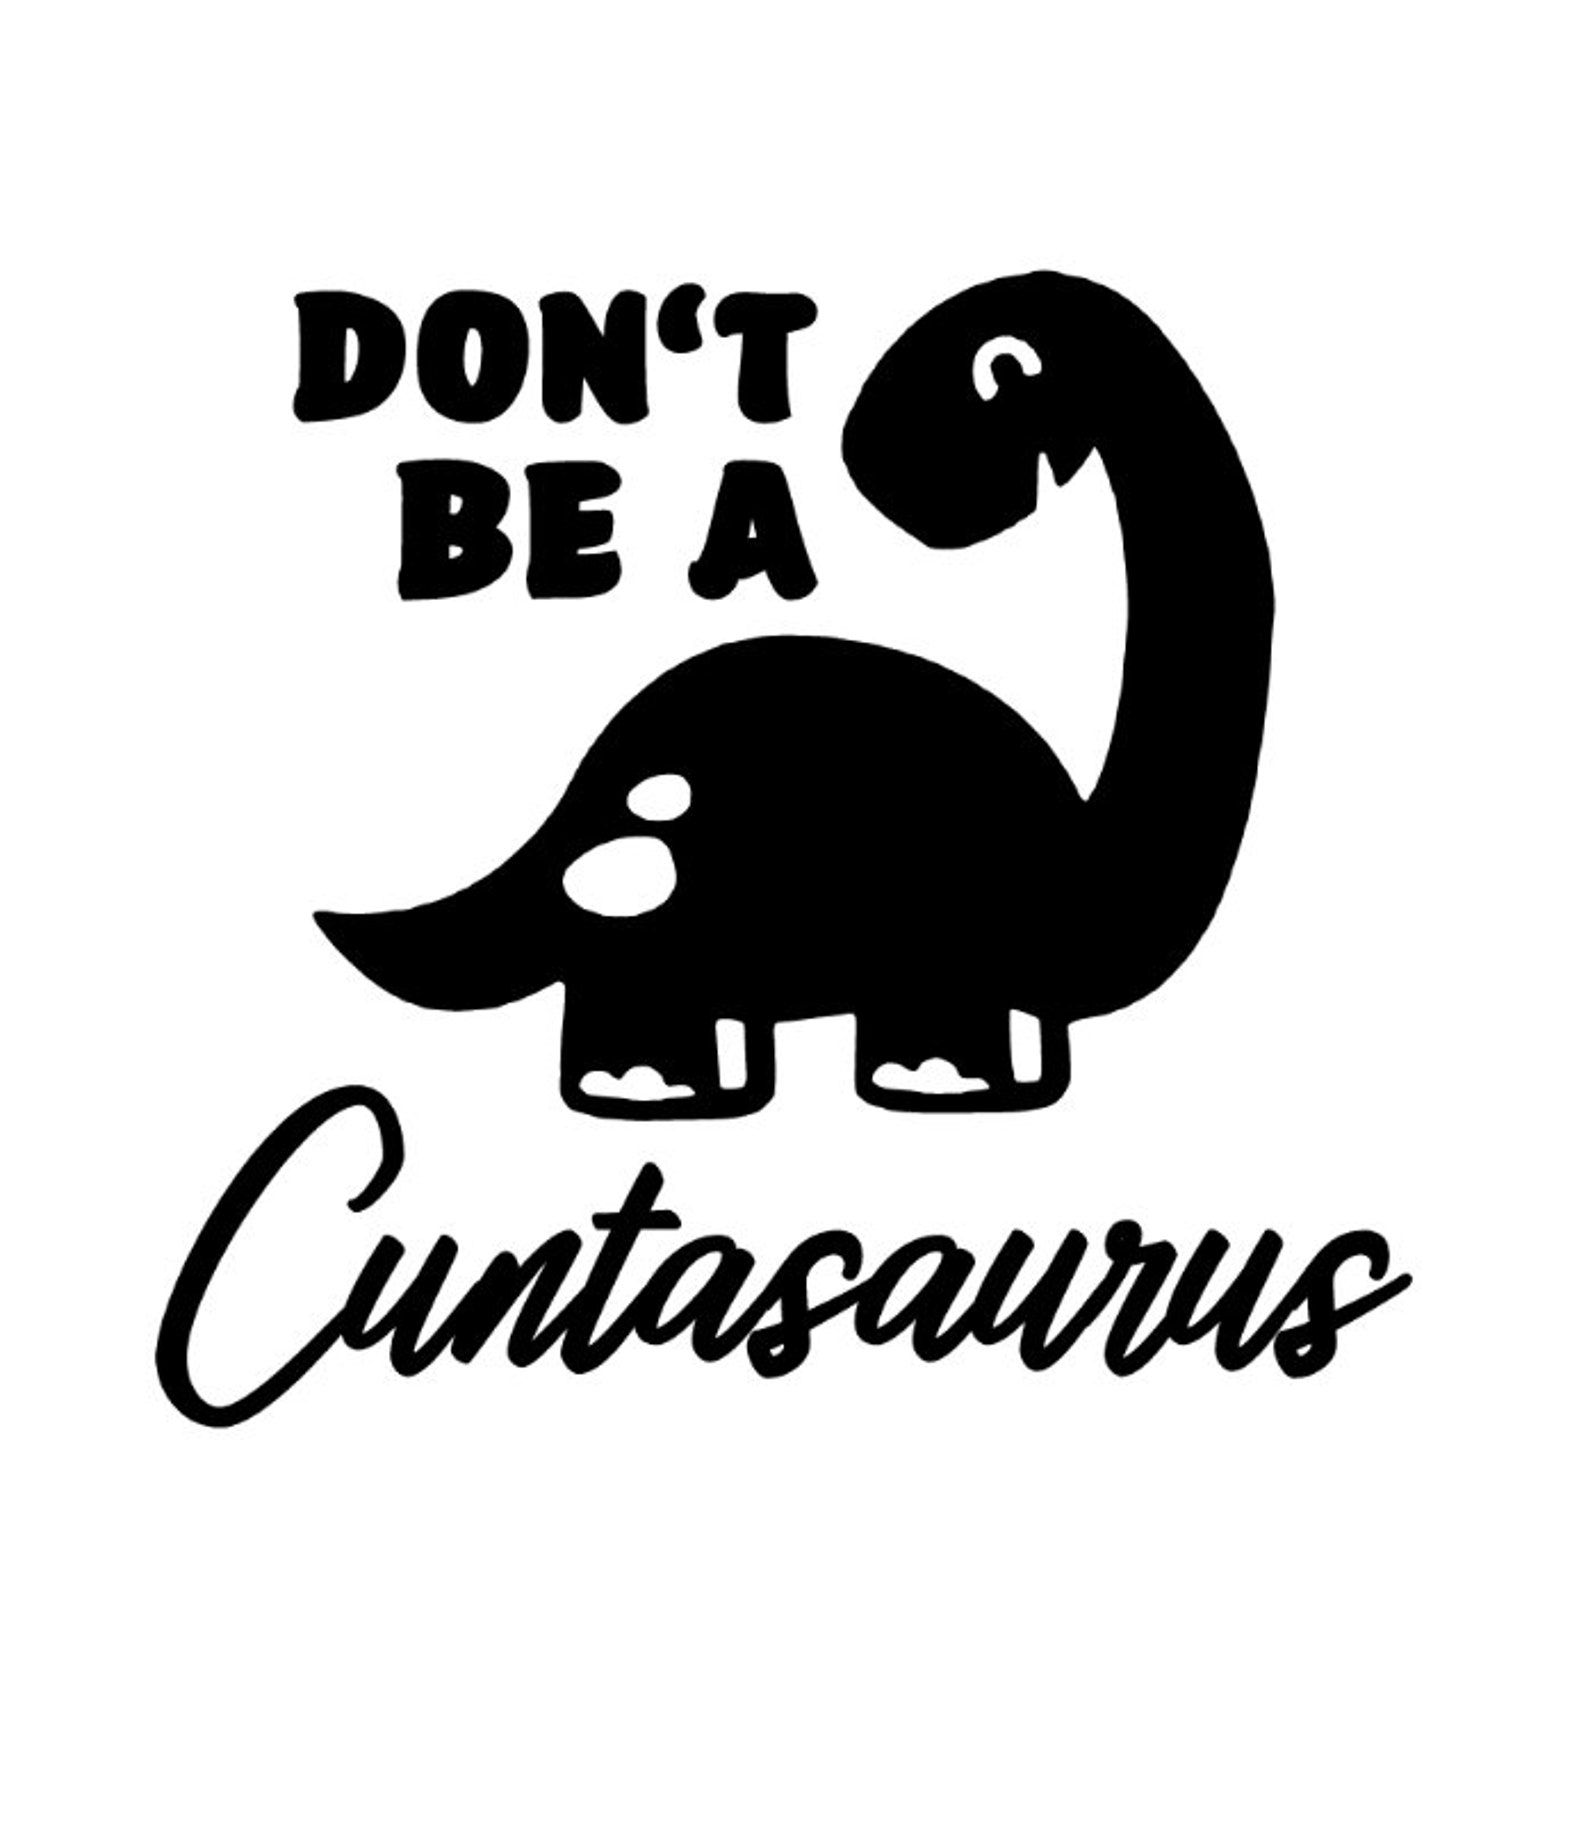 Funny Adult Permanent Vinyl Decal, Don't Be a Cuntasaurus, Cars, Trucks ...